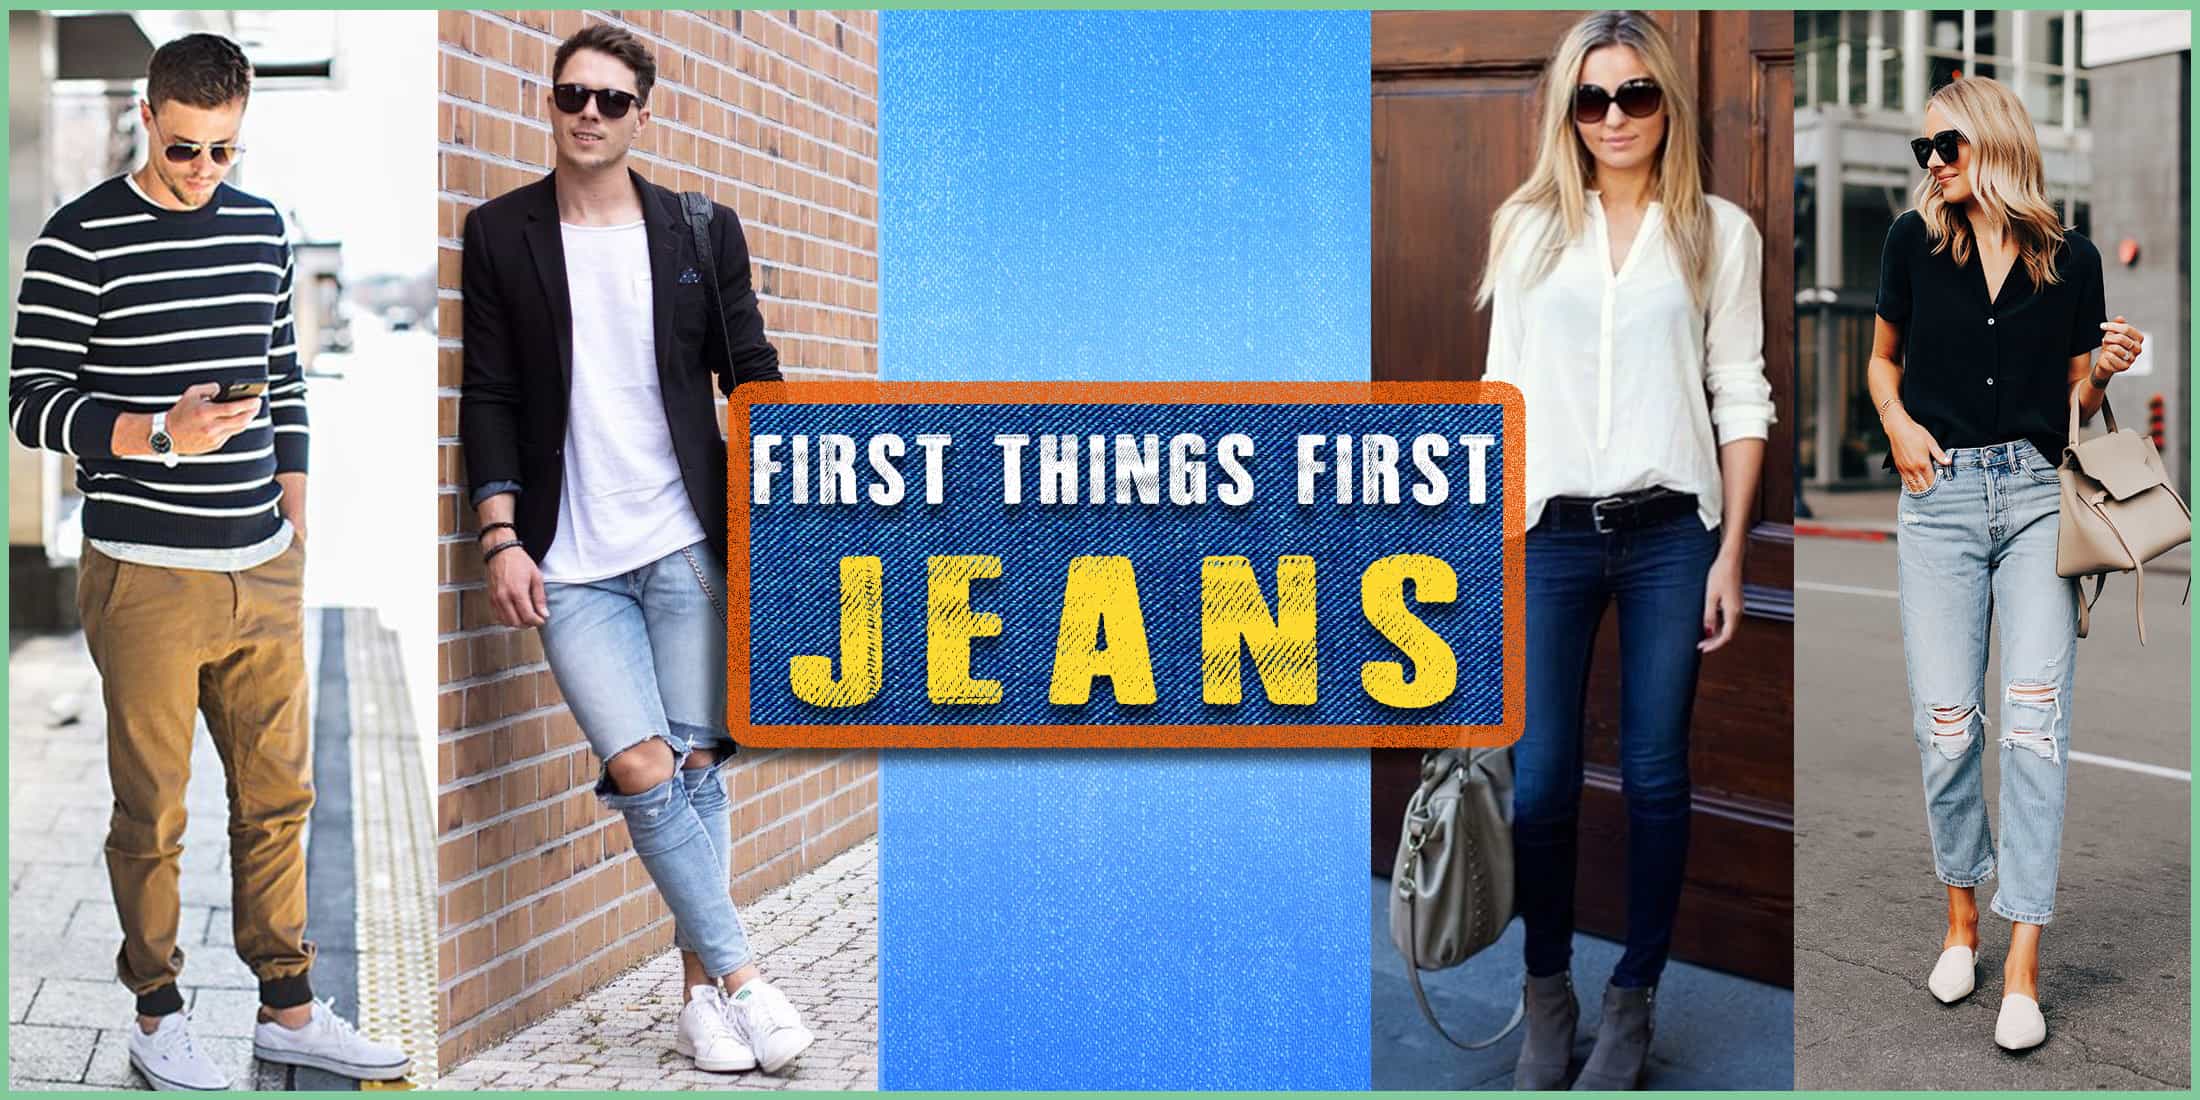 Discover more than 77 different types of jeans pants - in.eteachers